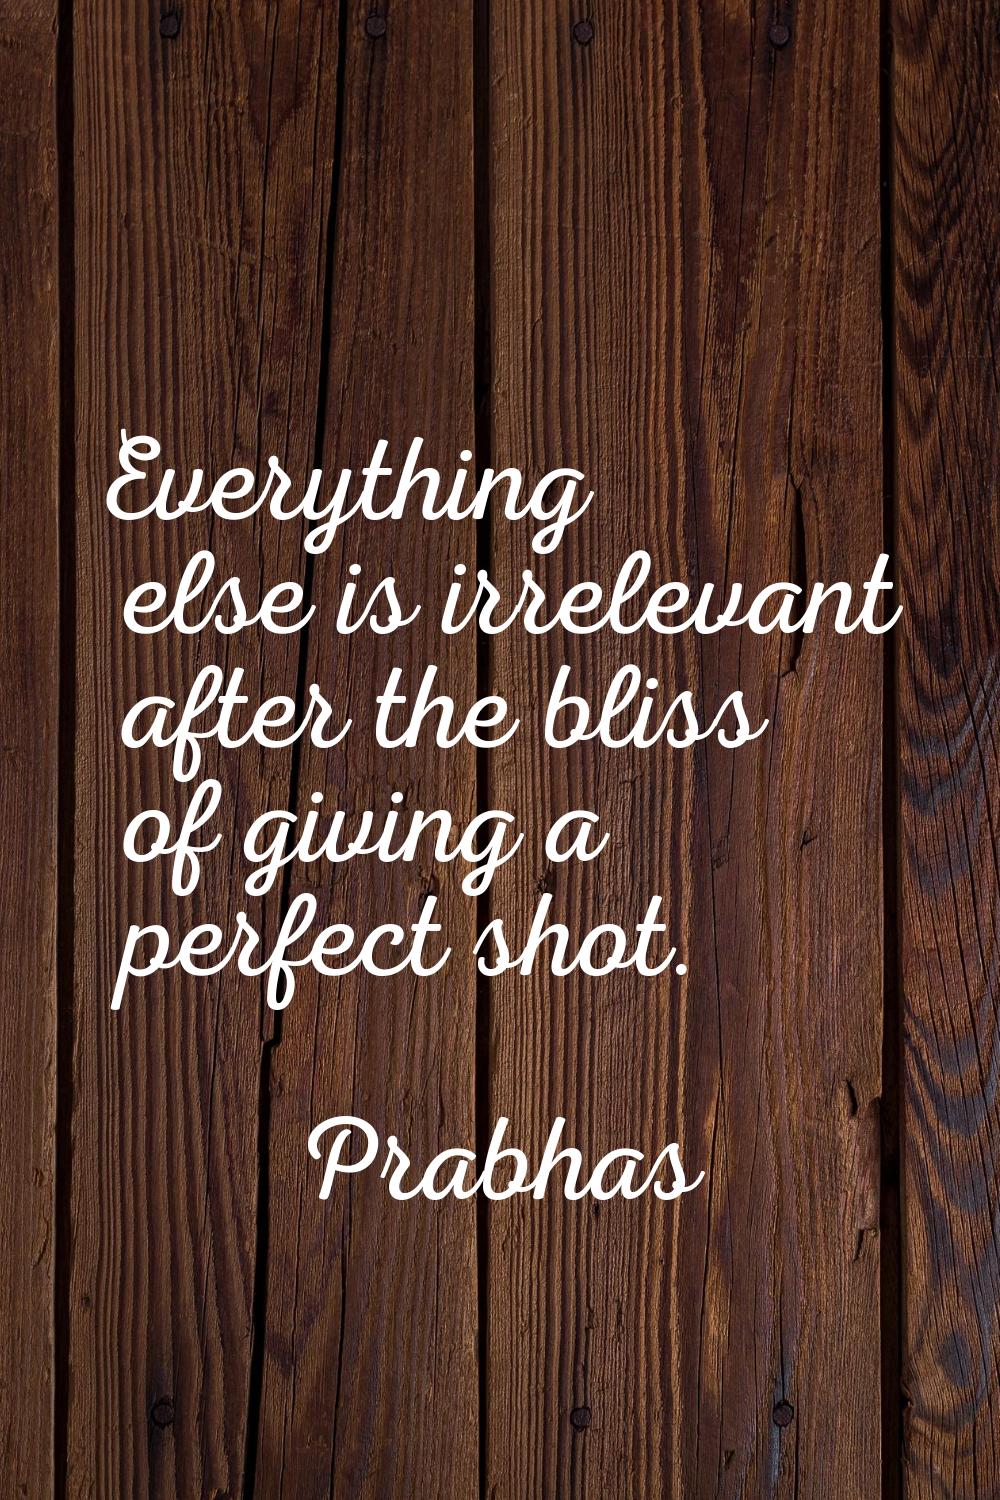 Everything else is irrelevant after the bliss of giving a perfect shot.